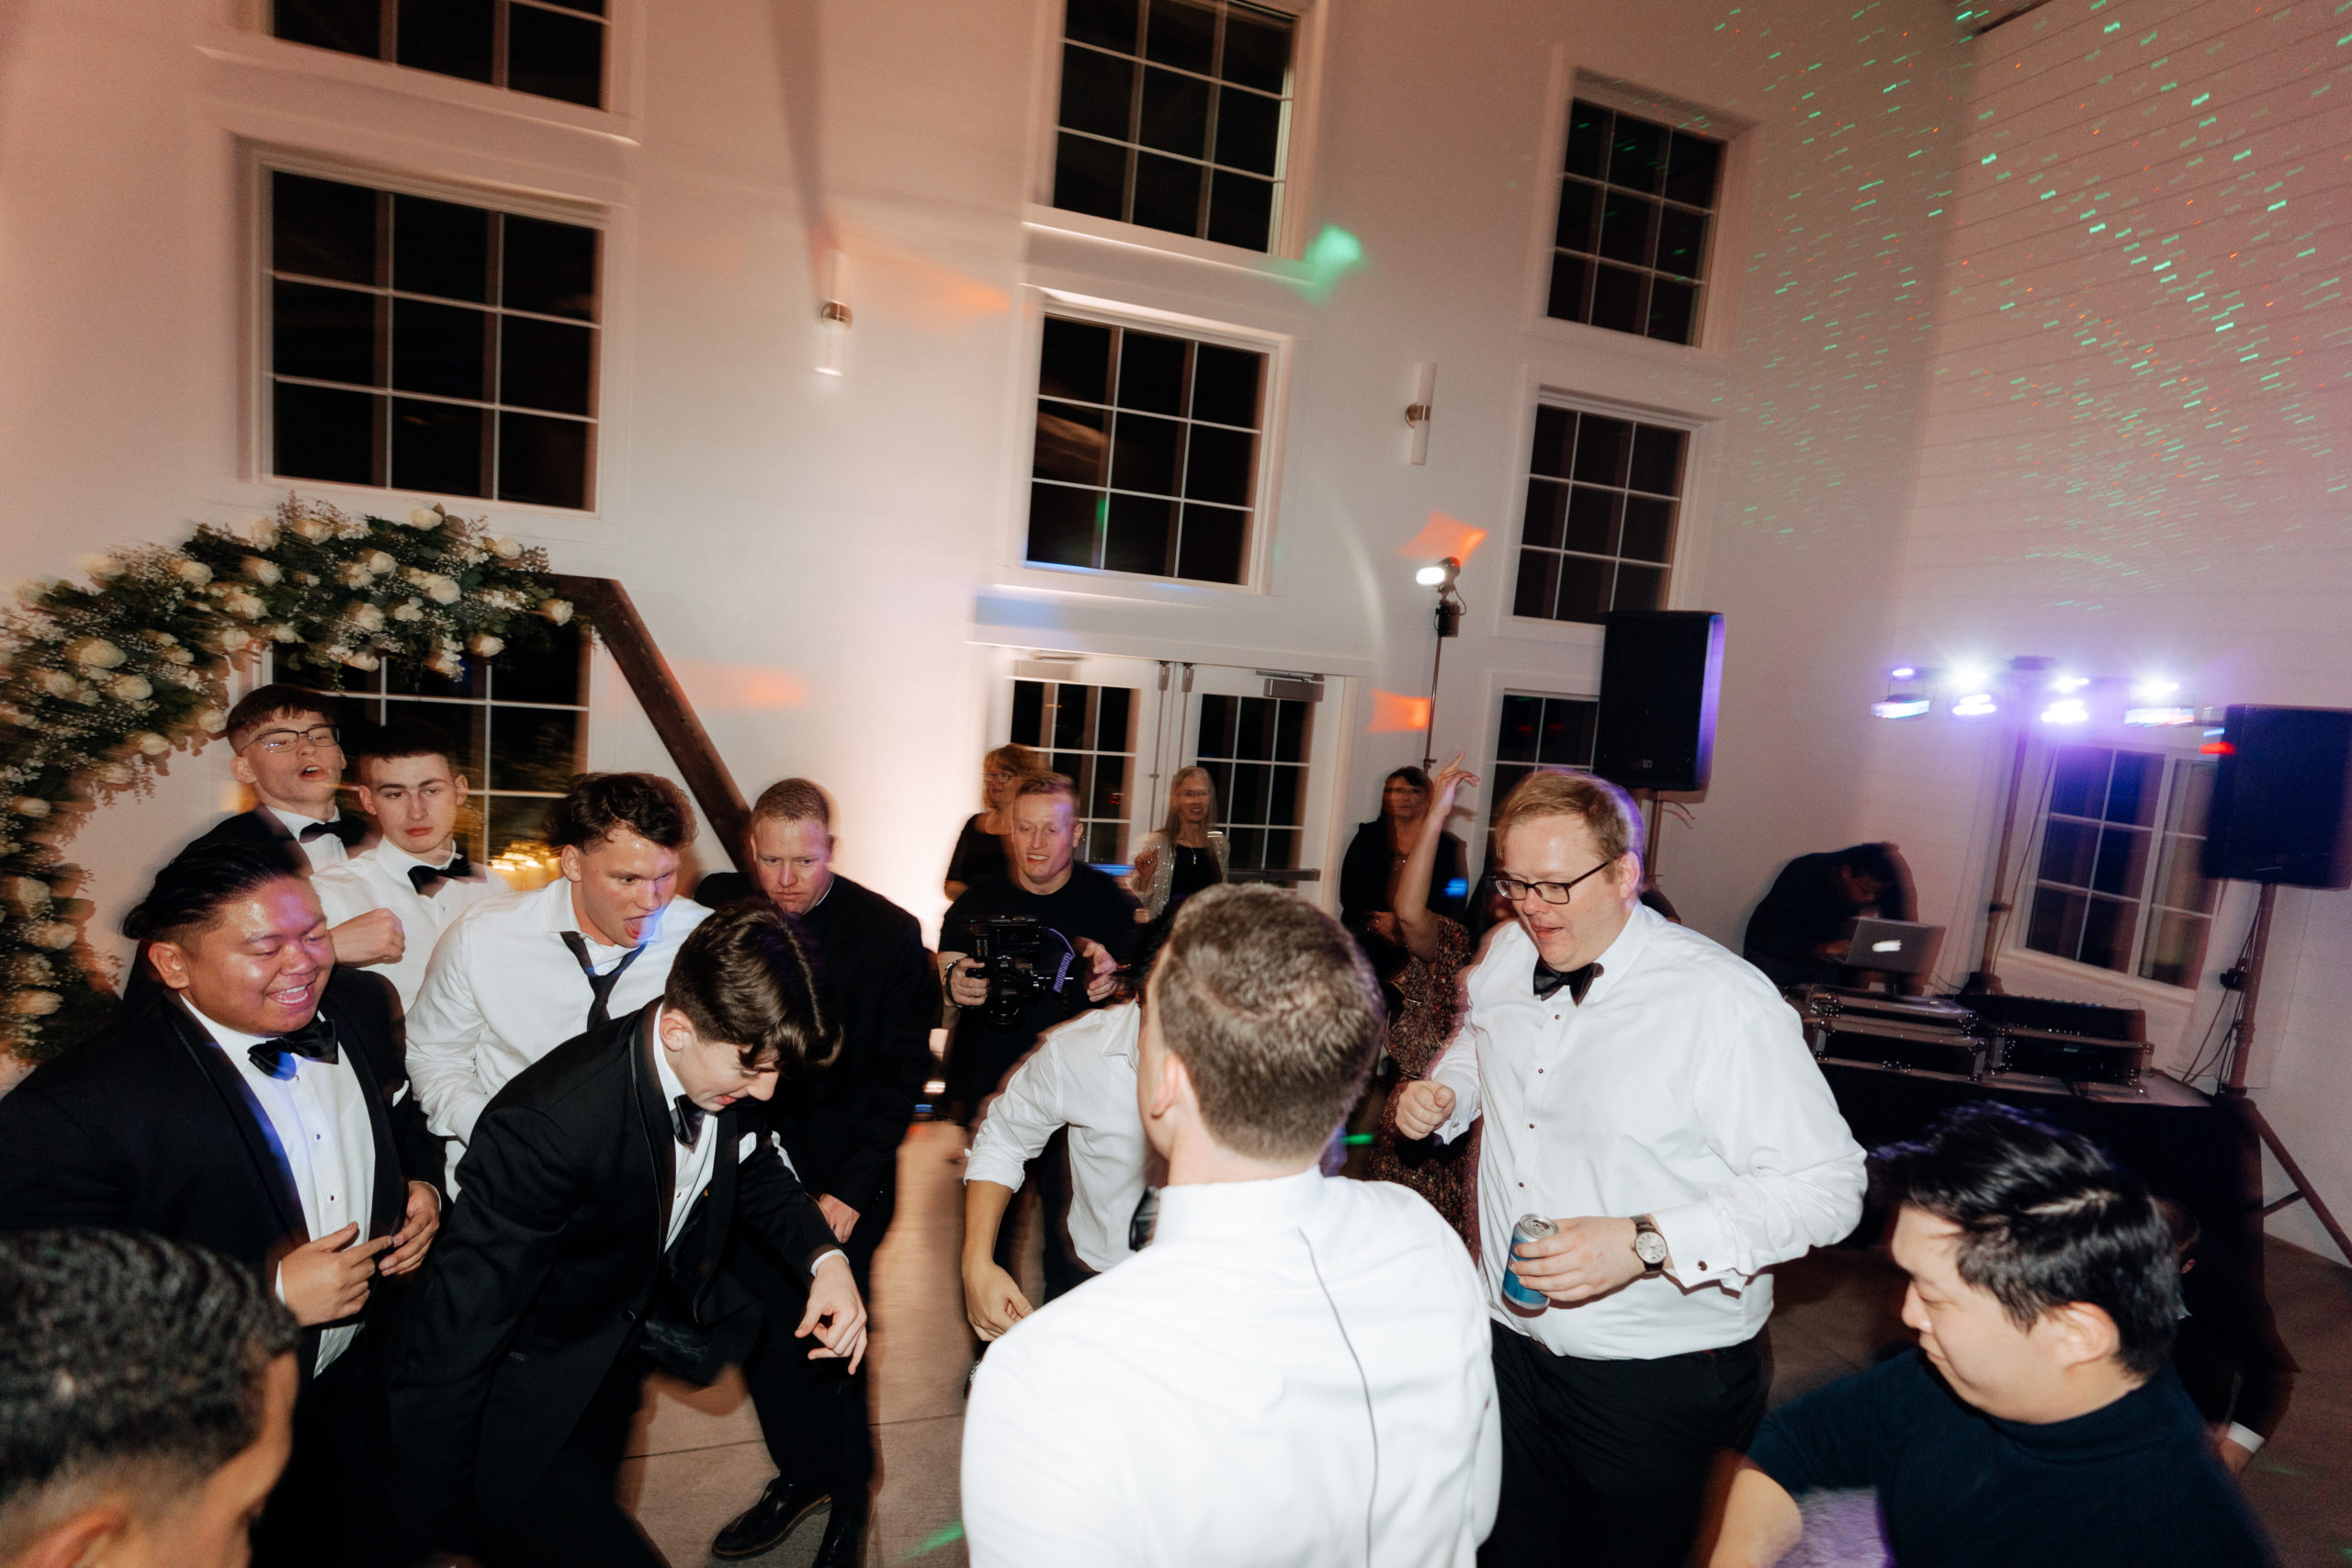 This is a picture of guests dancing at a wedding reception